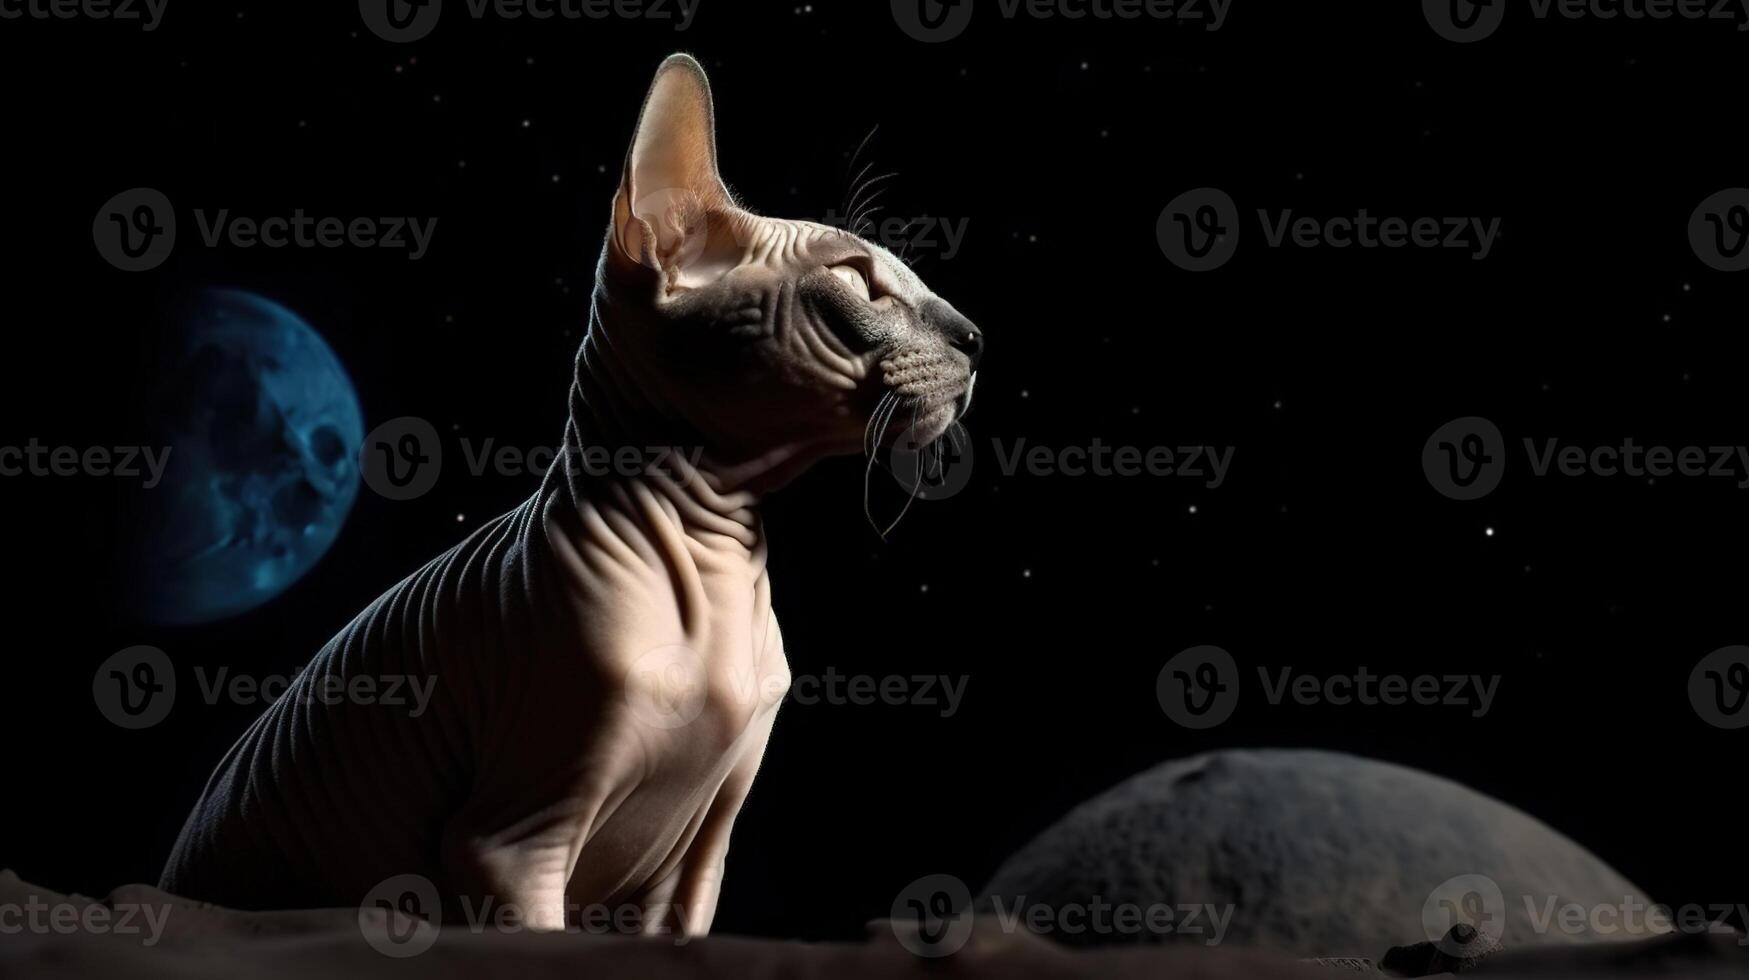 The Enchanting Sphinx Cat Gazing at the Mystical Moon and Starry Sky. photo